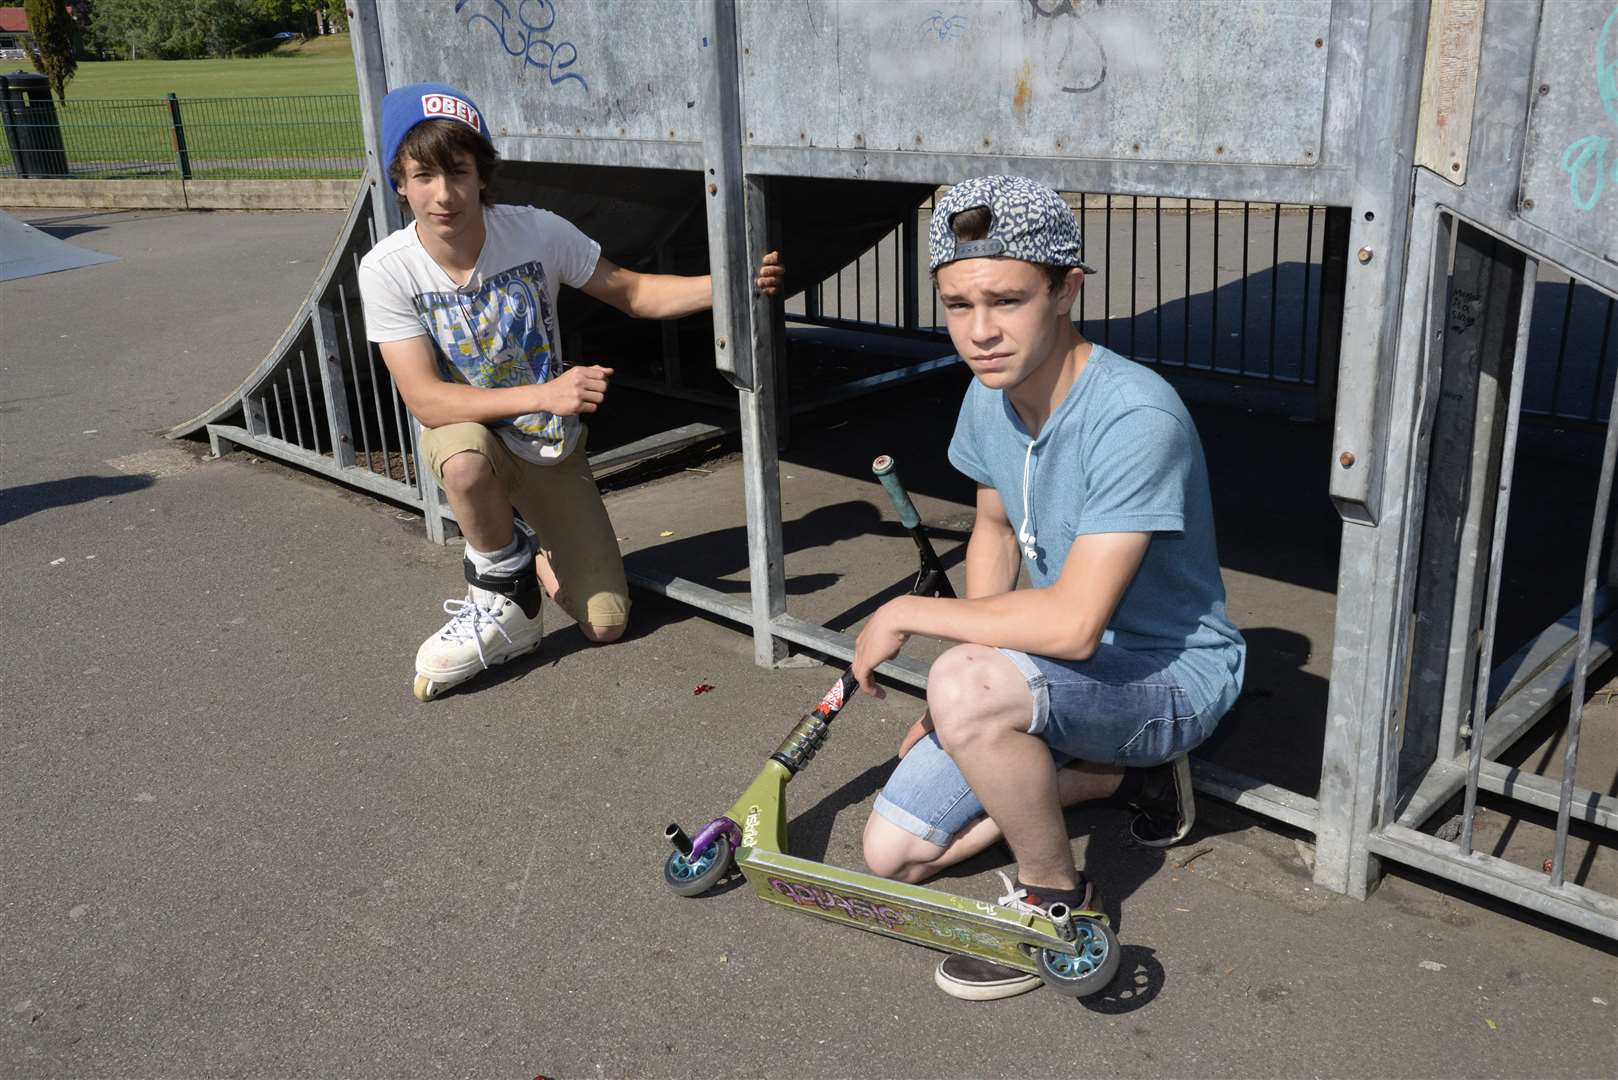 Charlie Potter, 15 and Jack Beadle, 14 with the missing grill on part of the equipment at the skate park at the Butts Recreation Ground